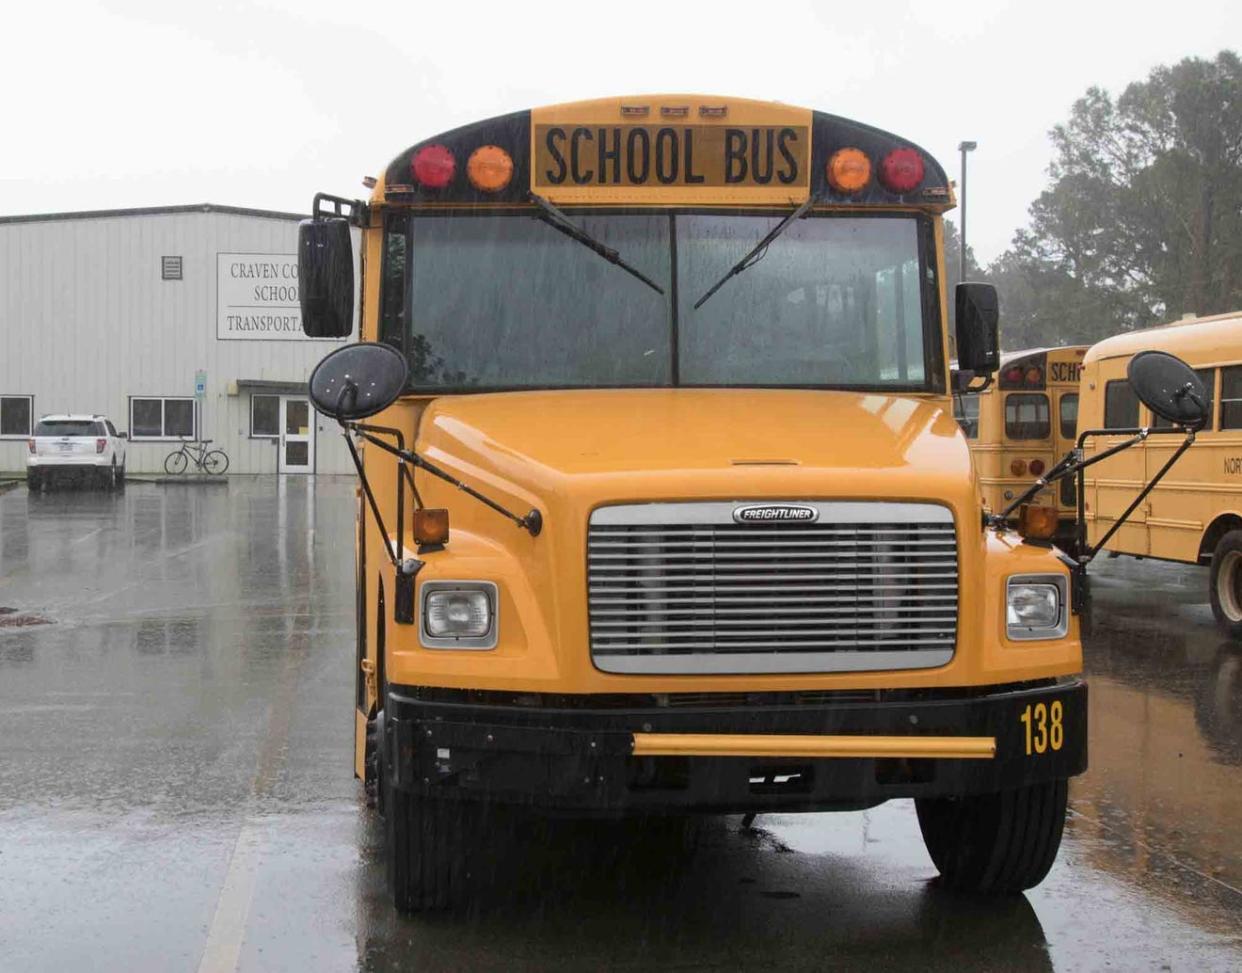 Havelock police are searching for a driver involved in a hit-and-run wreck with a school bus Tuesday.